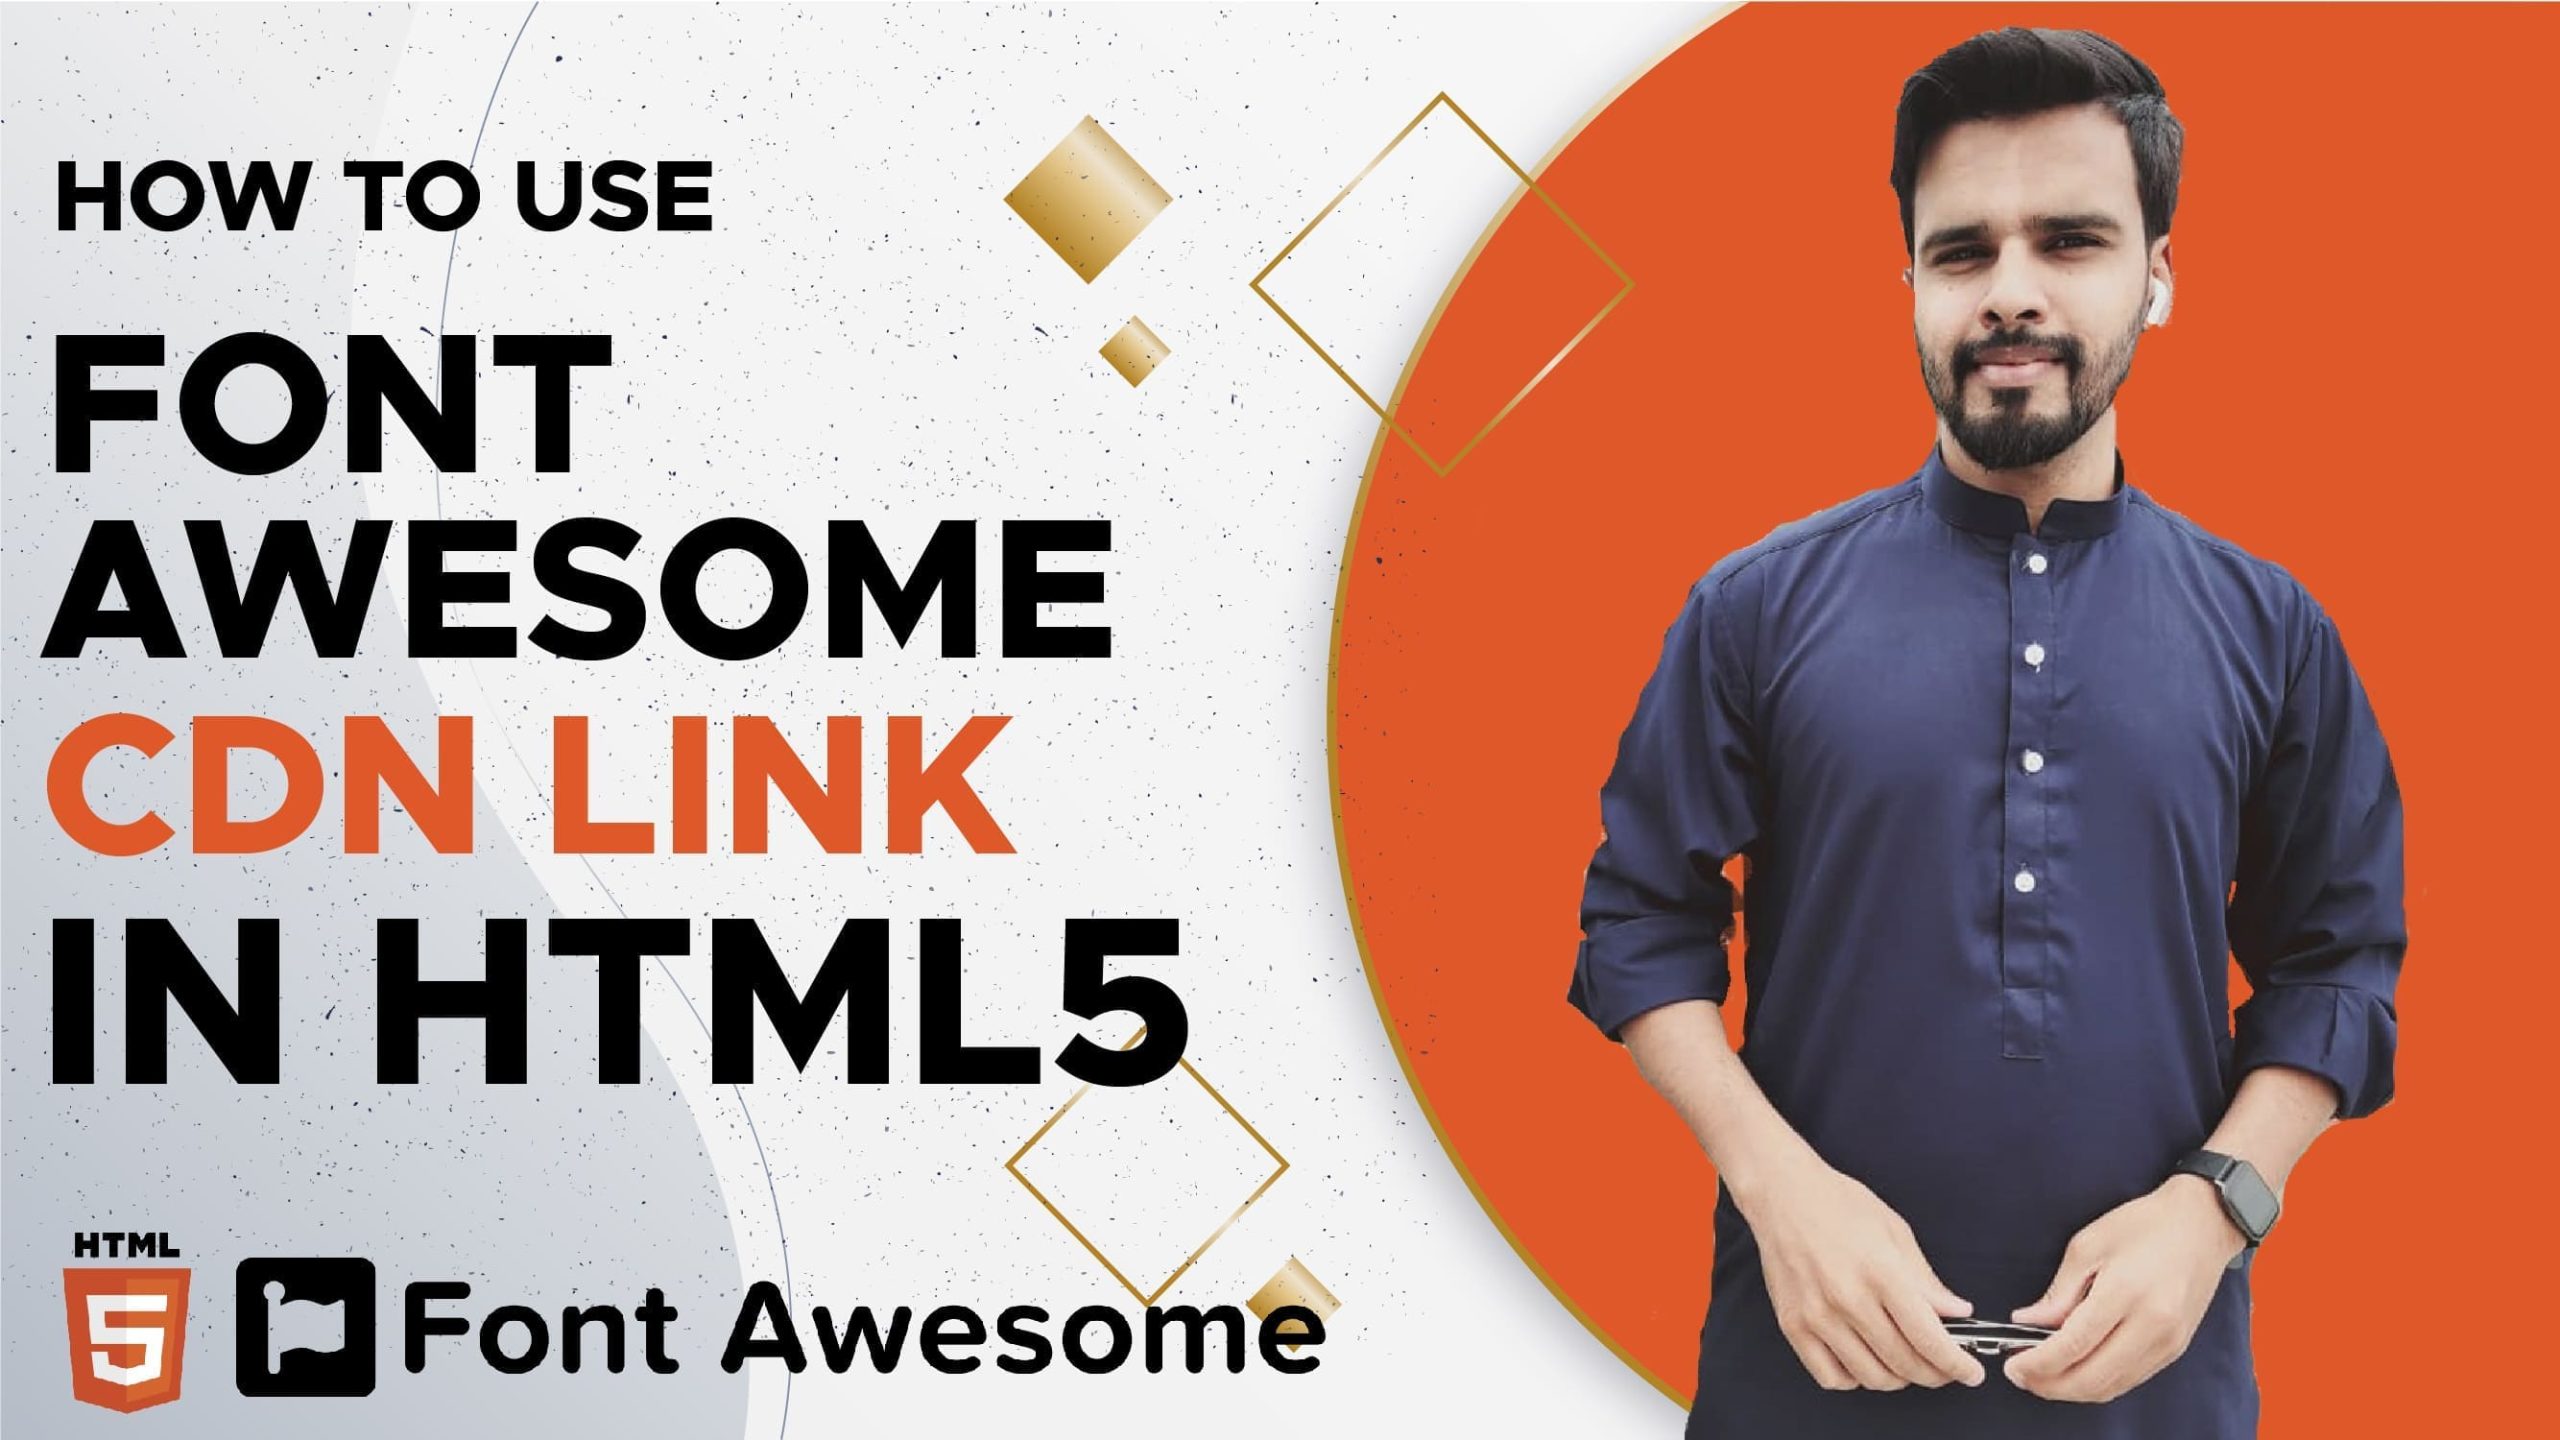 How To Use Font Awesome Icons CDN Link in HTML5 Digital Techsol